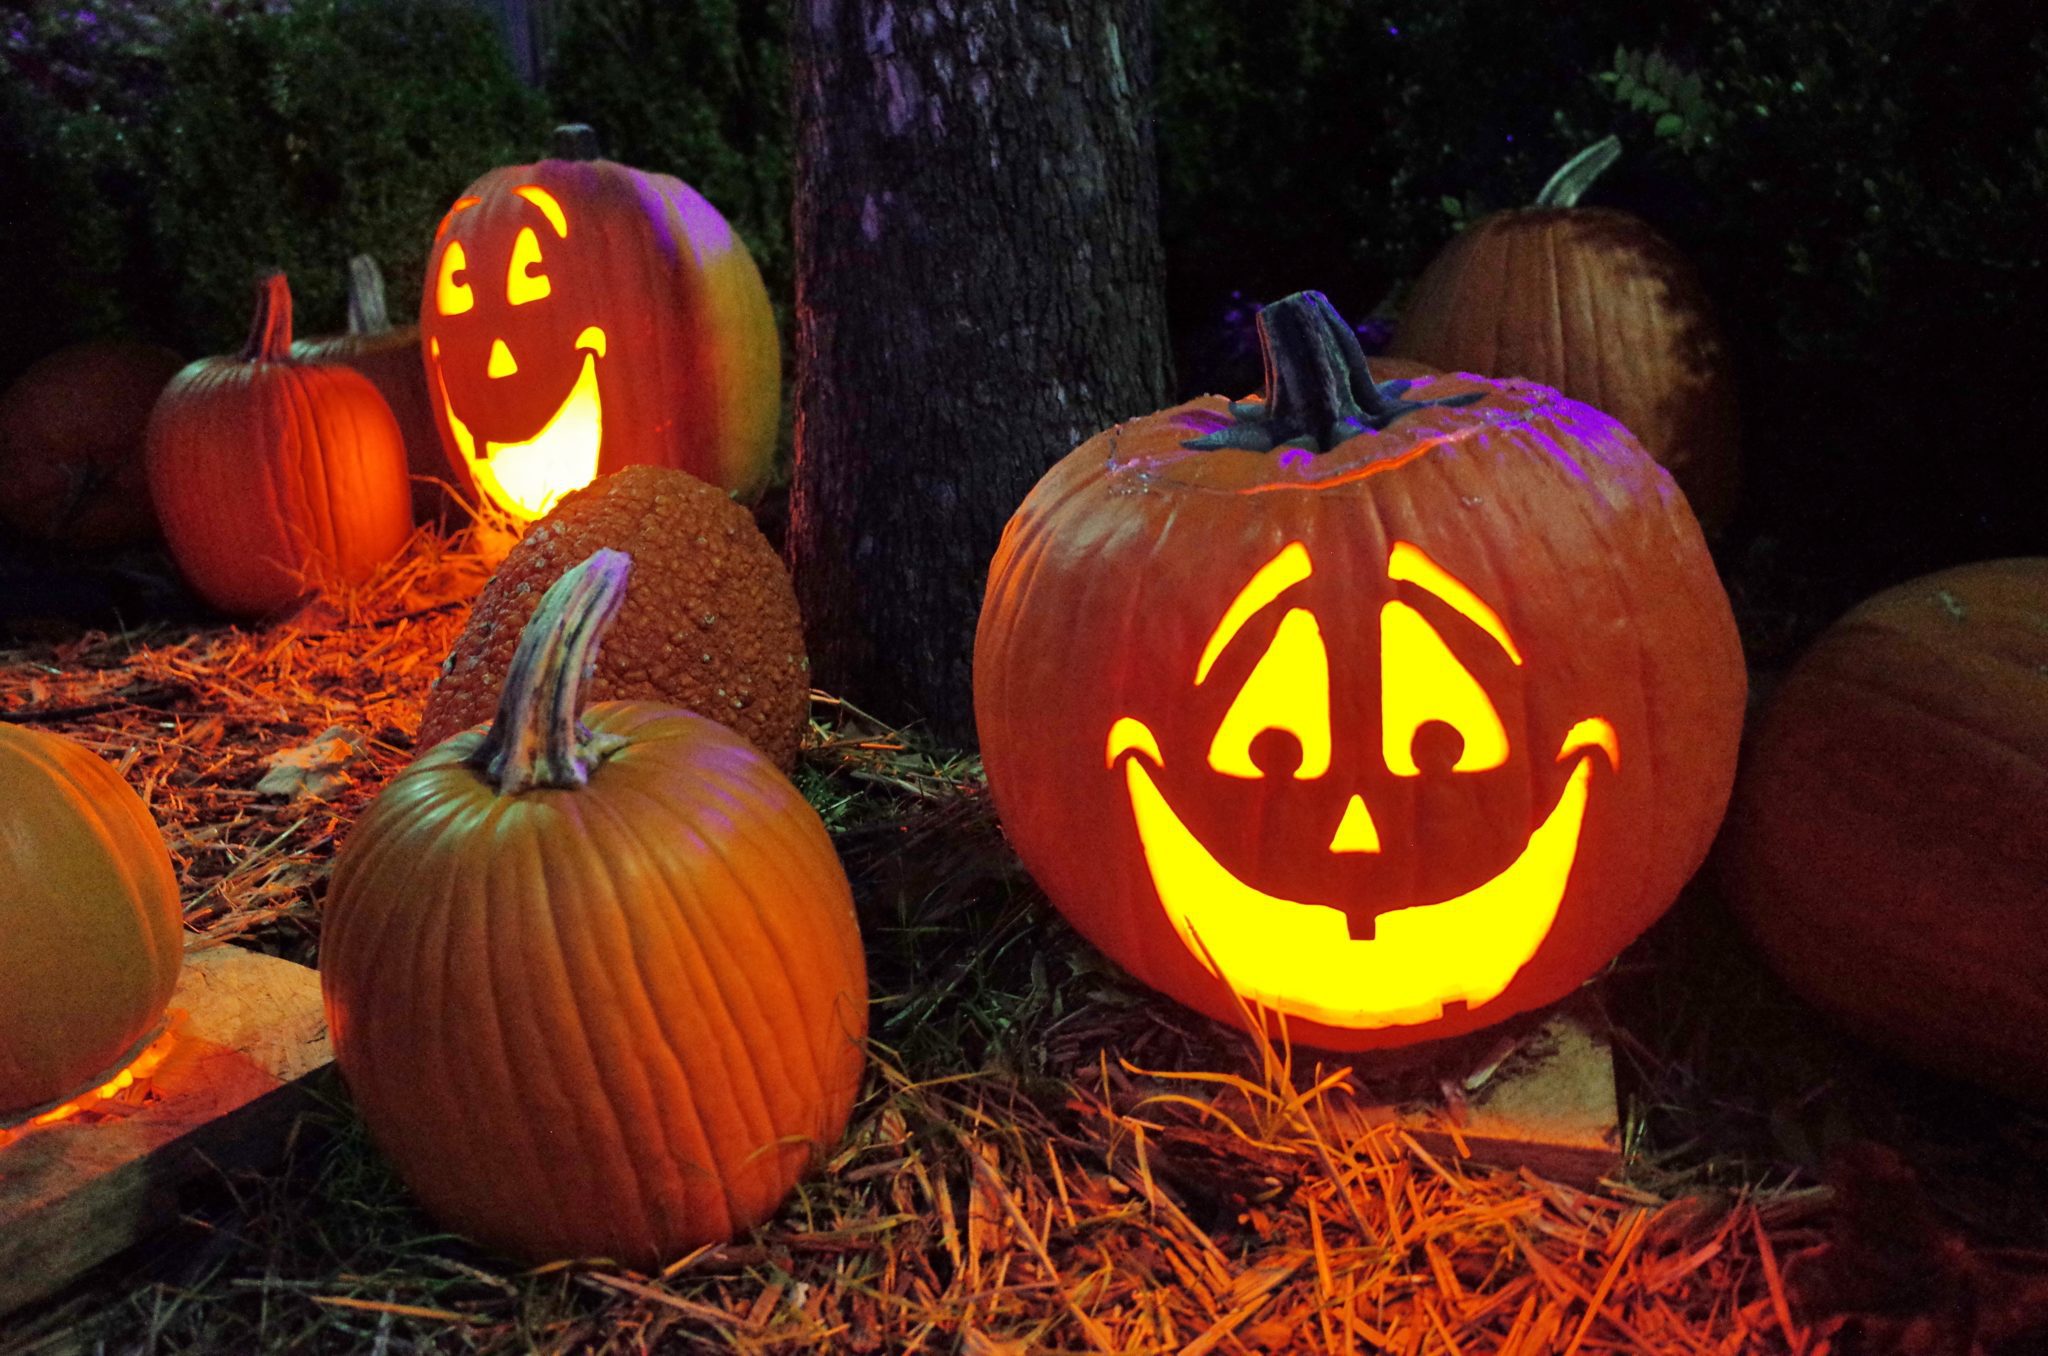 Several pumpkins and carved jack-o-lanterns sit on the ground outdoors. Two of the jack-o-lanterns are lit up by candle light, and are smiling toward the camera.